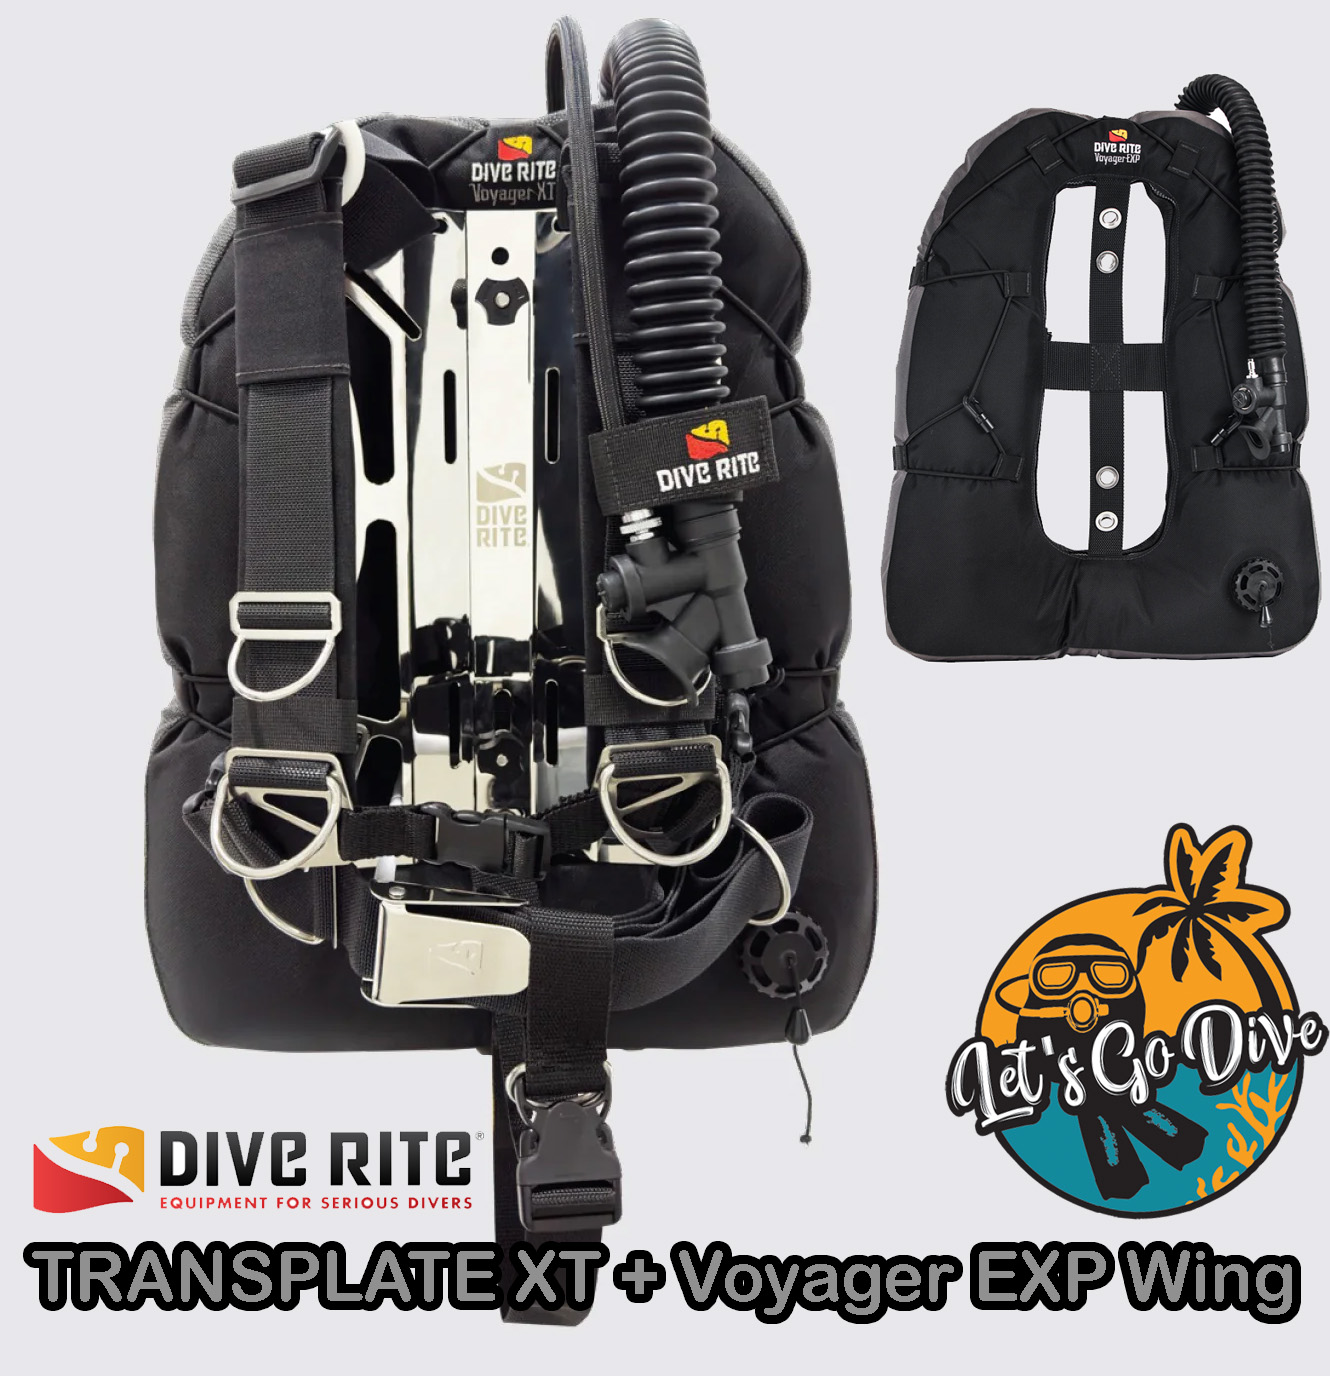 Dive Rite Voyager EXP (with valve)